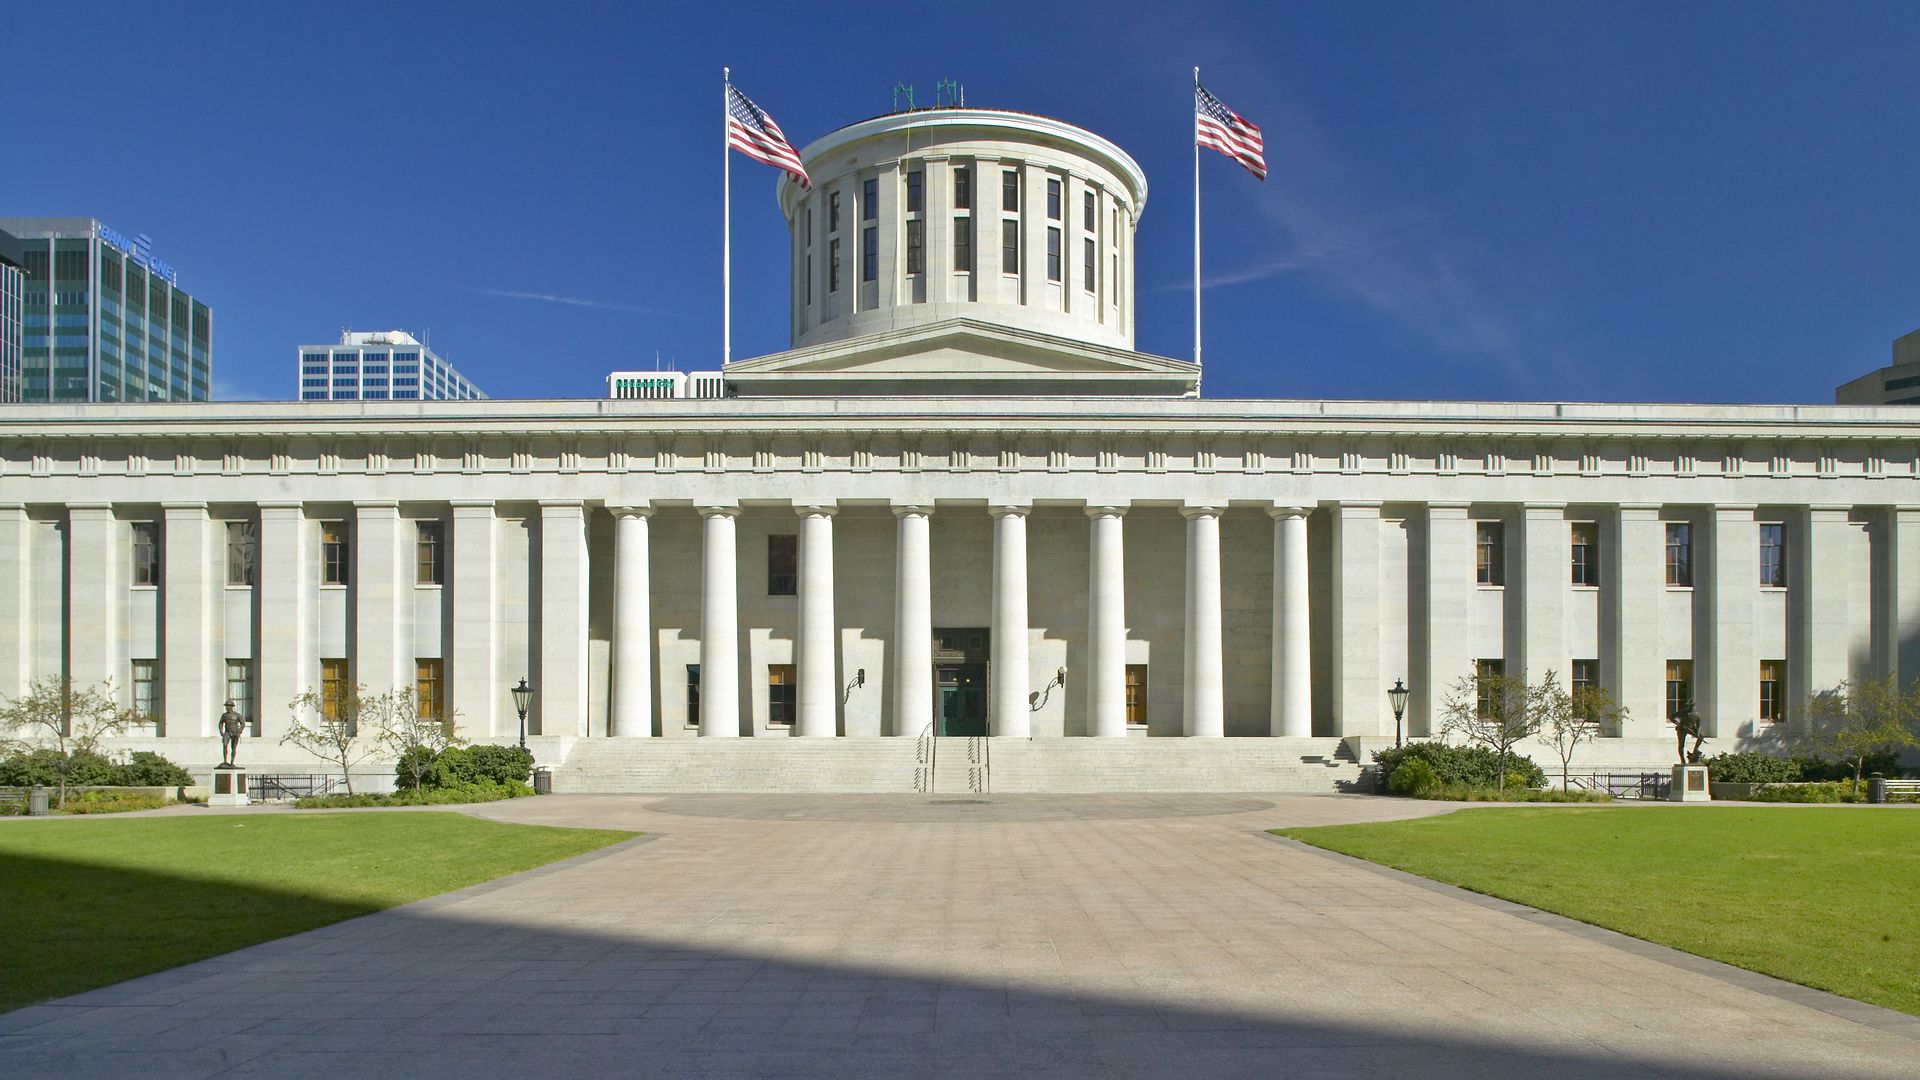 The front of the Ohio Statehouse